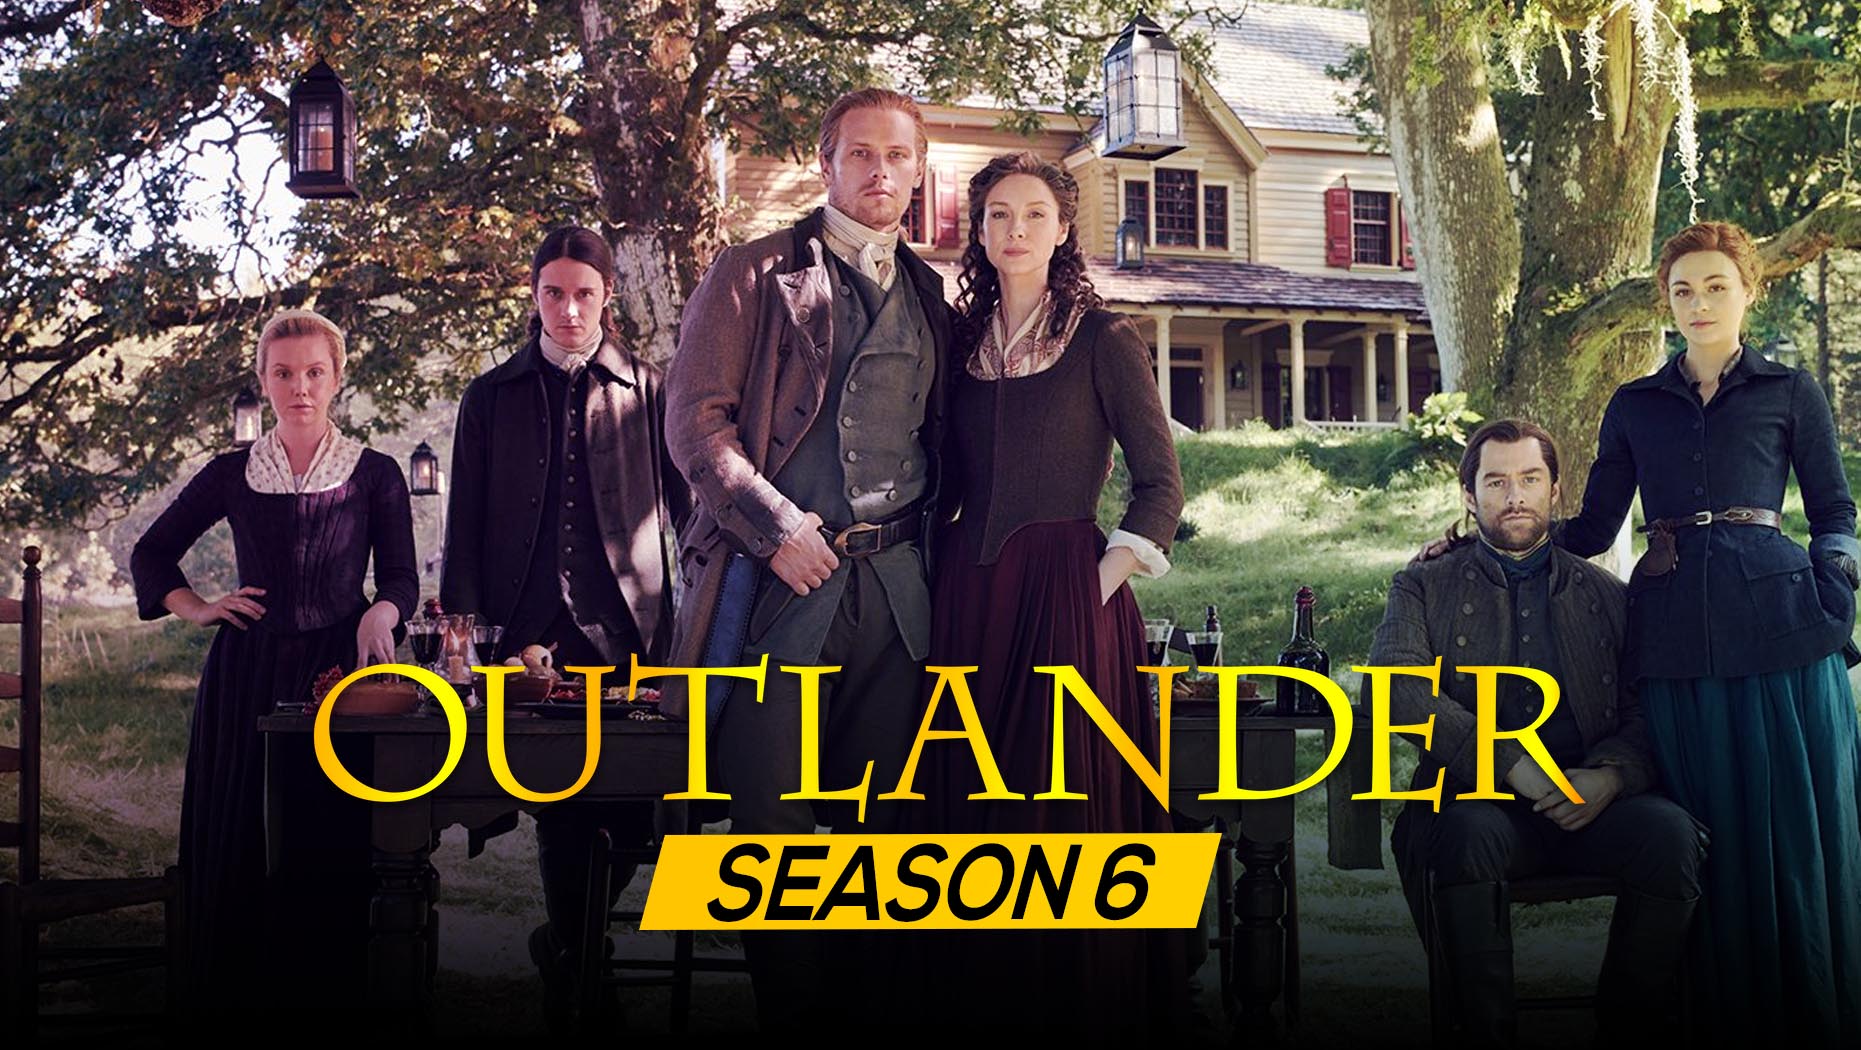 Outlander Season 6 Cast, Release date and other details you must know